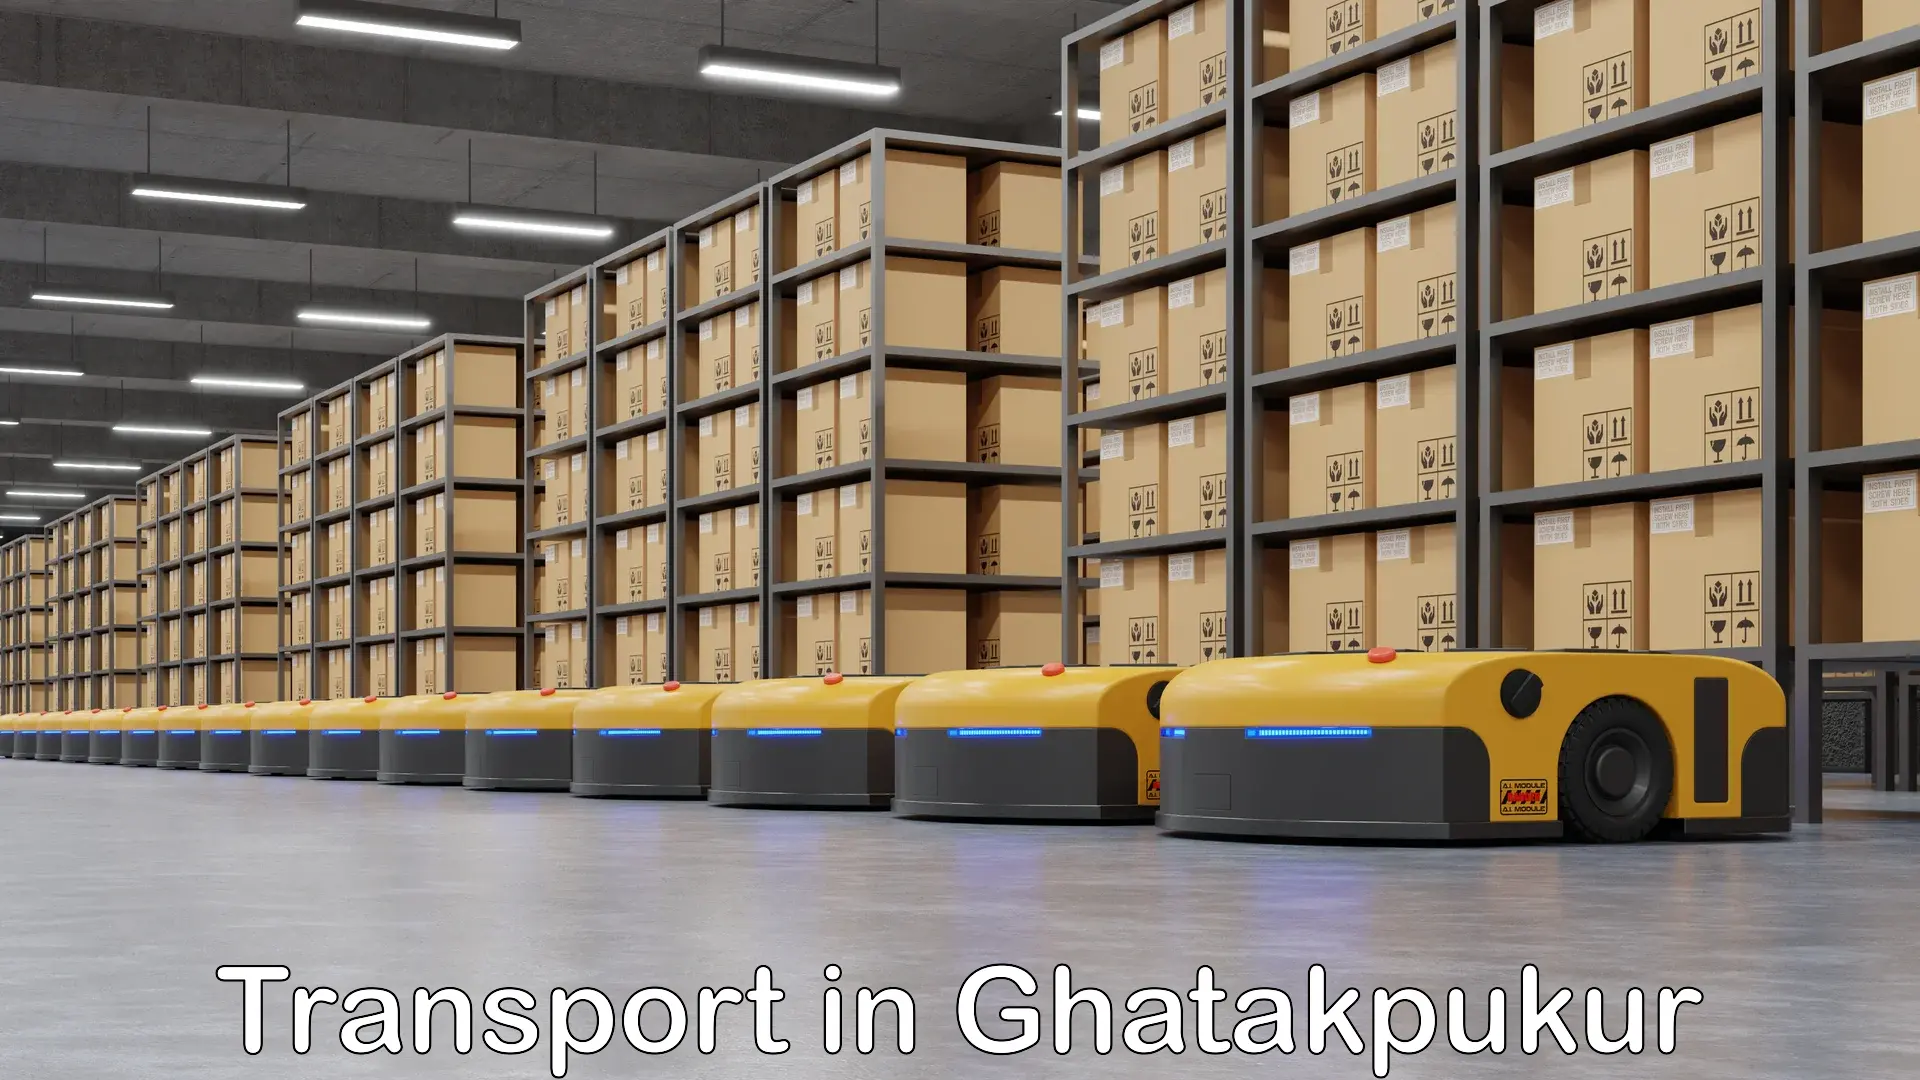 Land transport services in Ghatakpukur